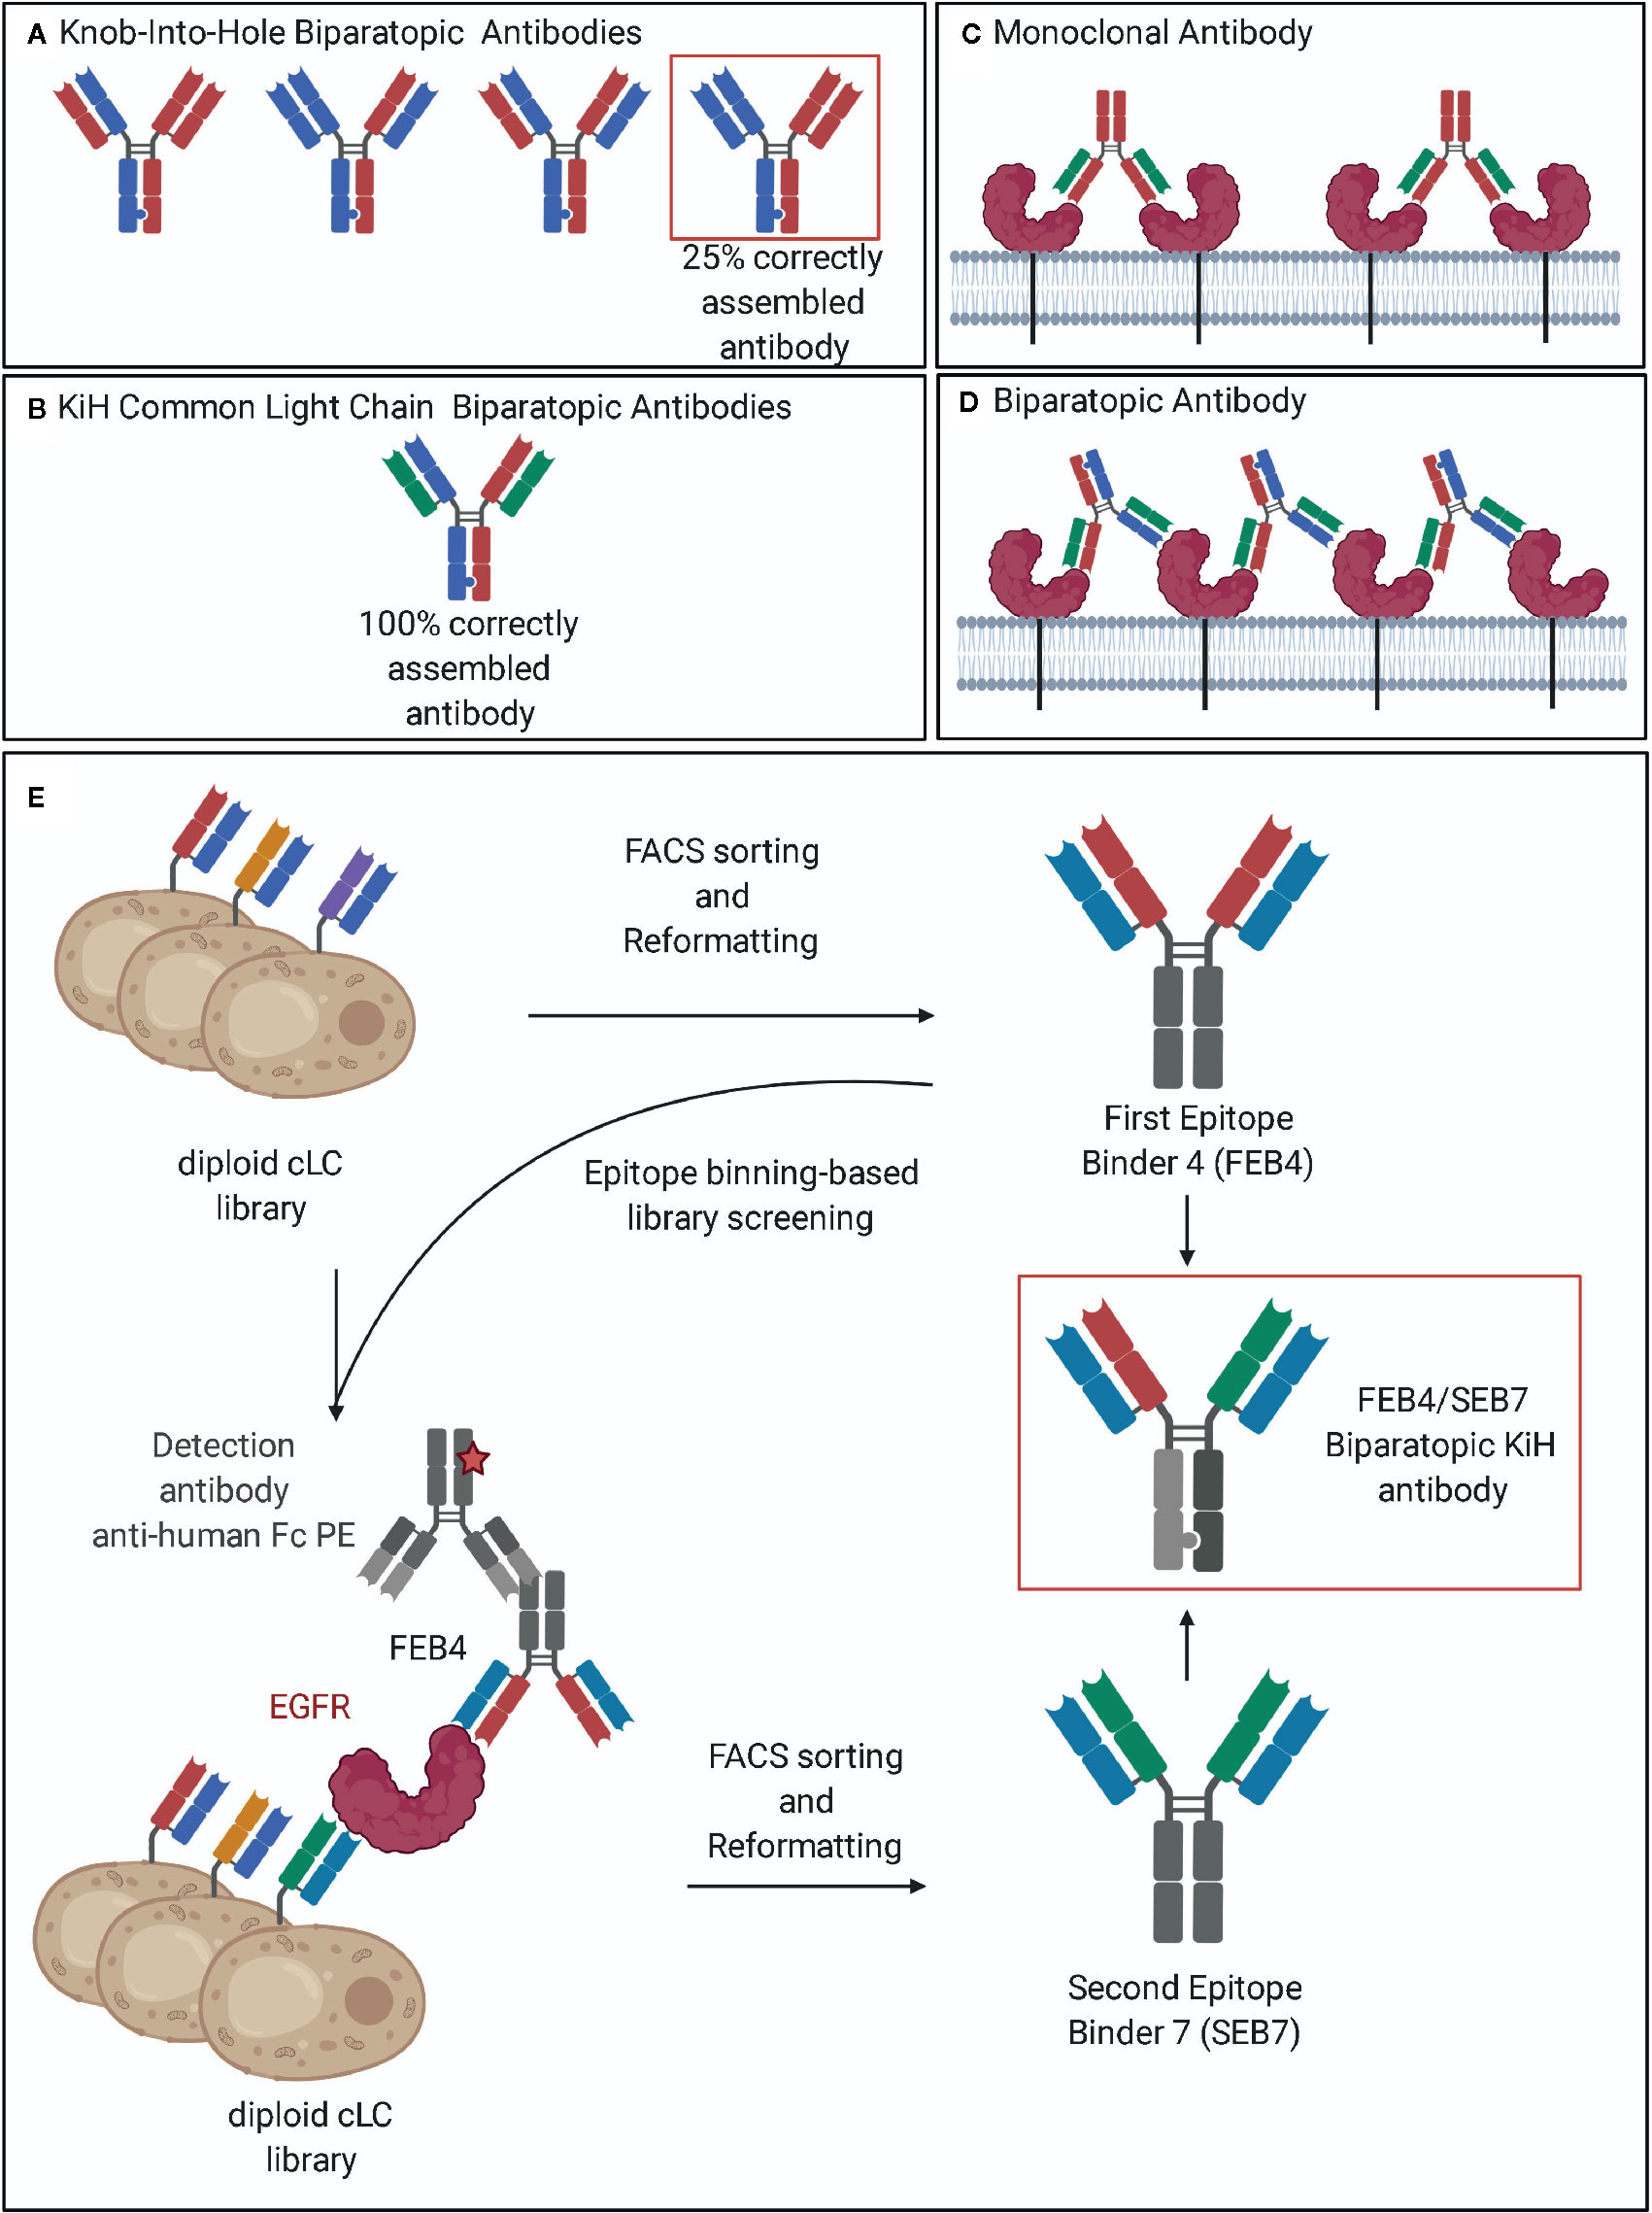 Frontiers | Expeditious Generation of Biparatopic Common Light Chain Antibodies via Chicken Immunization and Yeast Display Screening